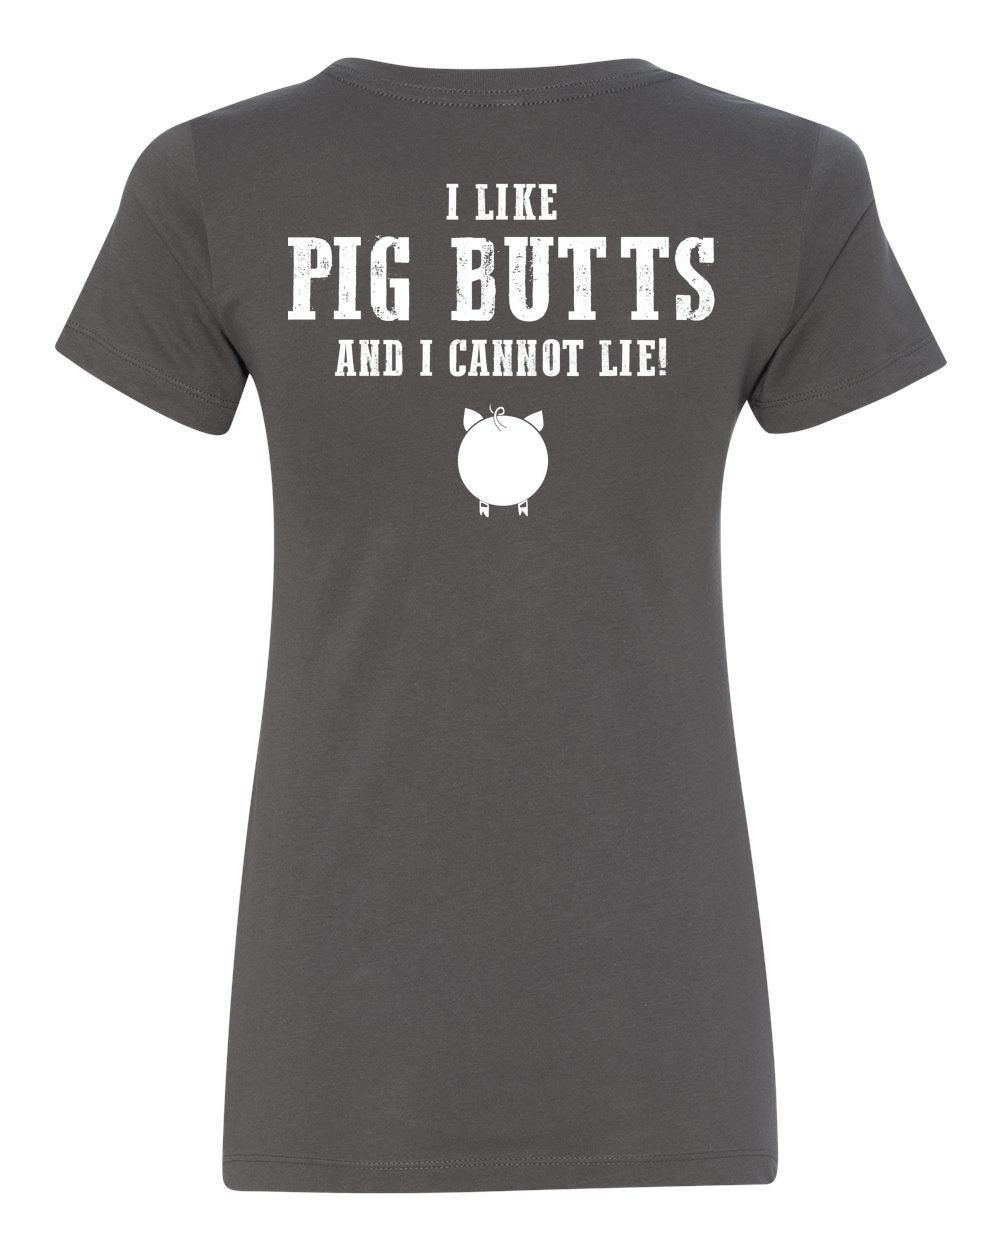 Brother Johns I Like Pig Butts Women’s T-Shirt